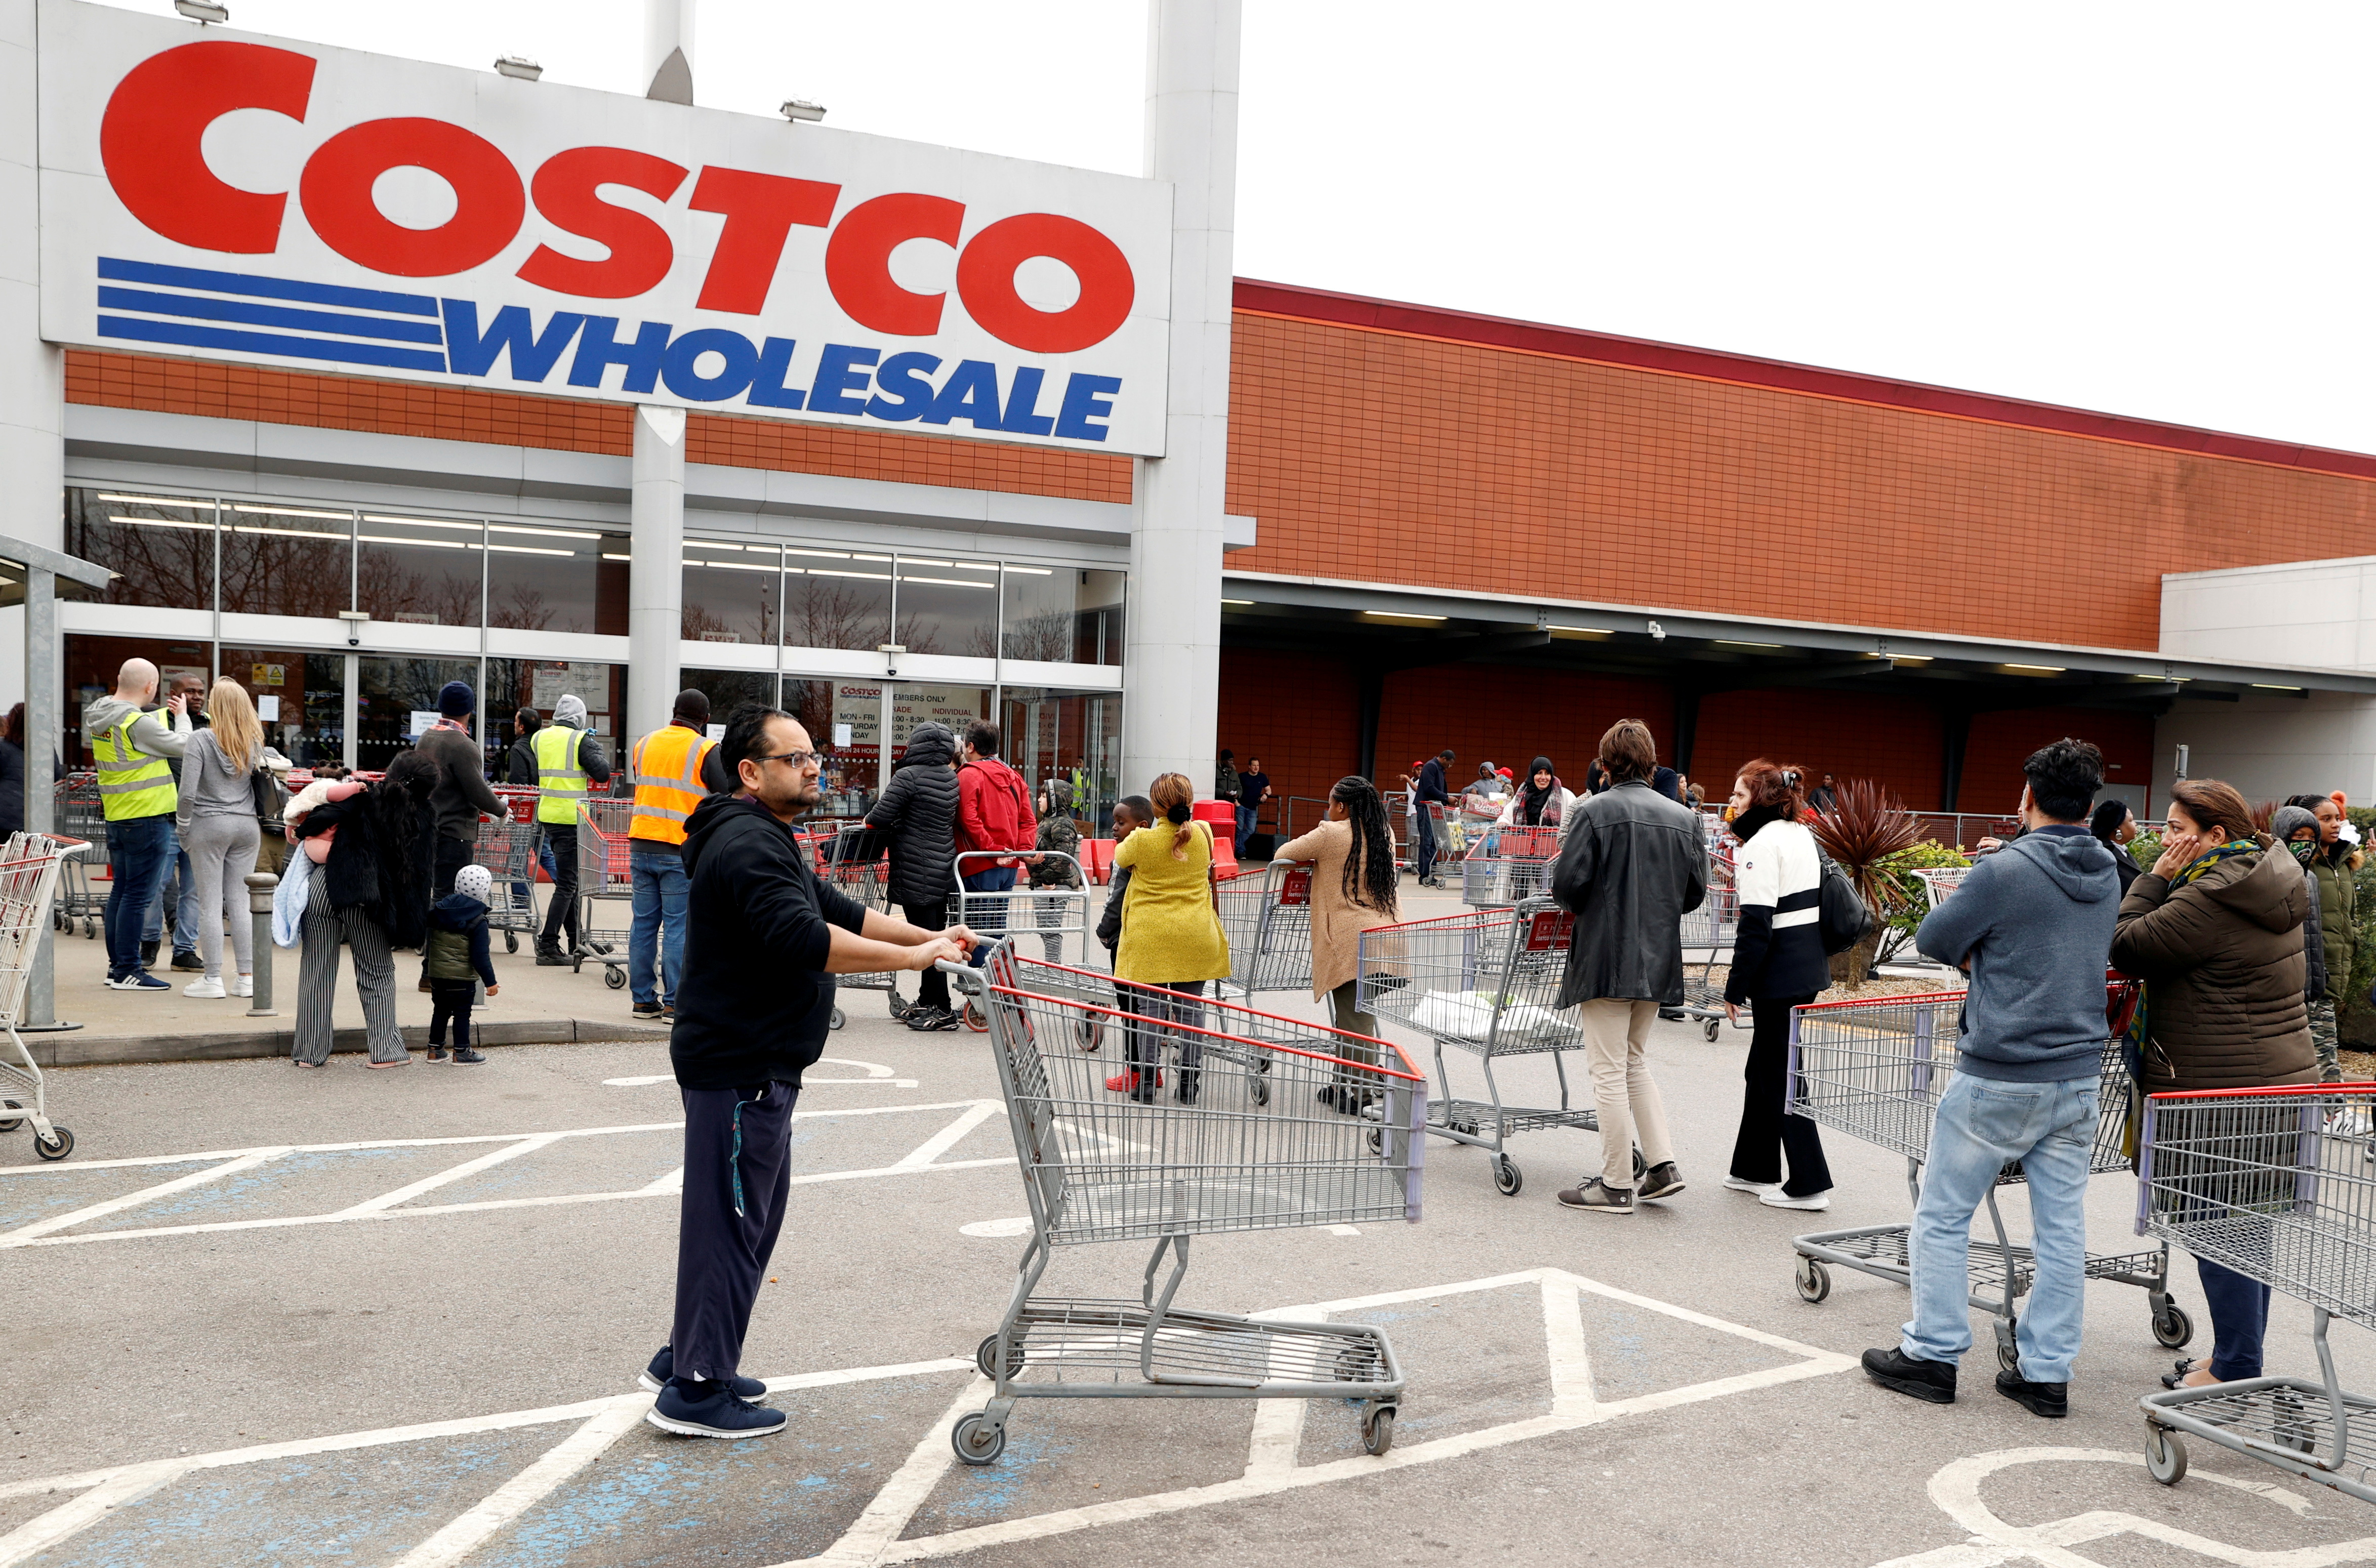 Customers queue to enter a Costco Wholesale store in Chingford